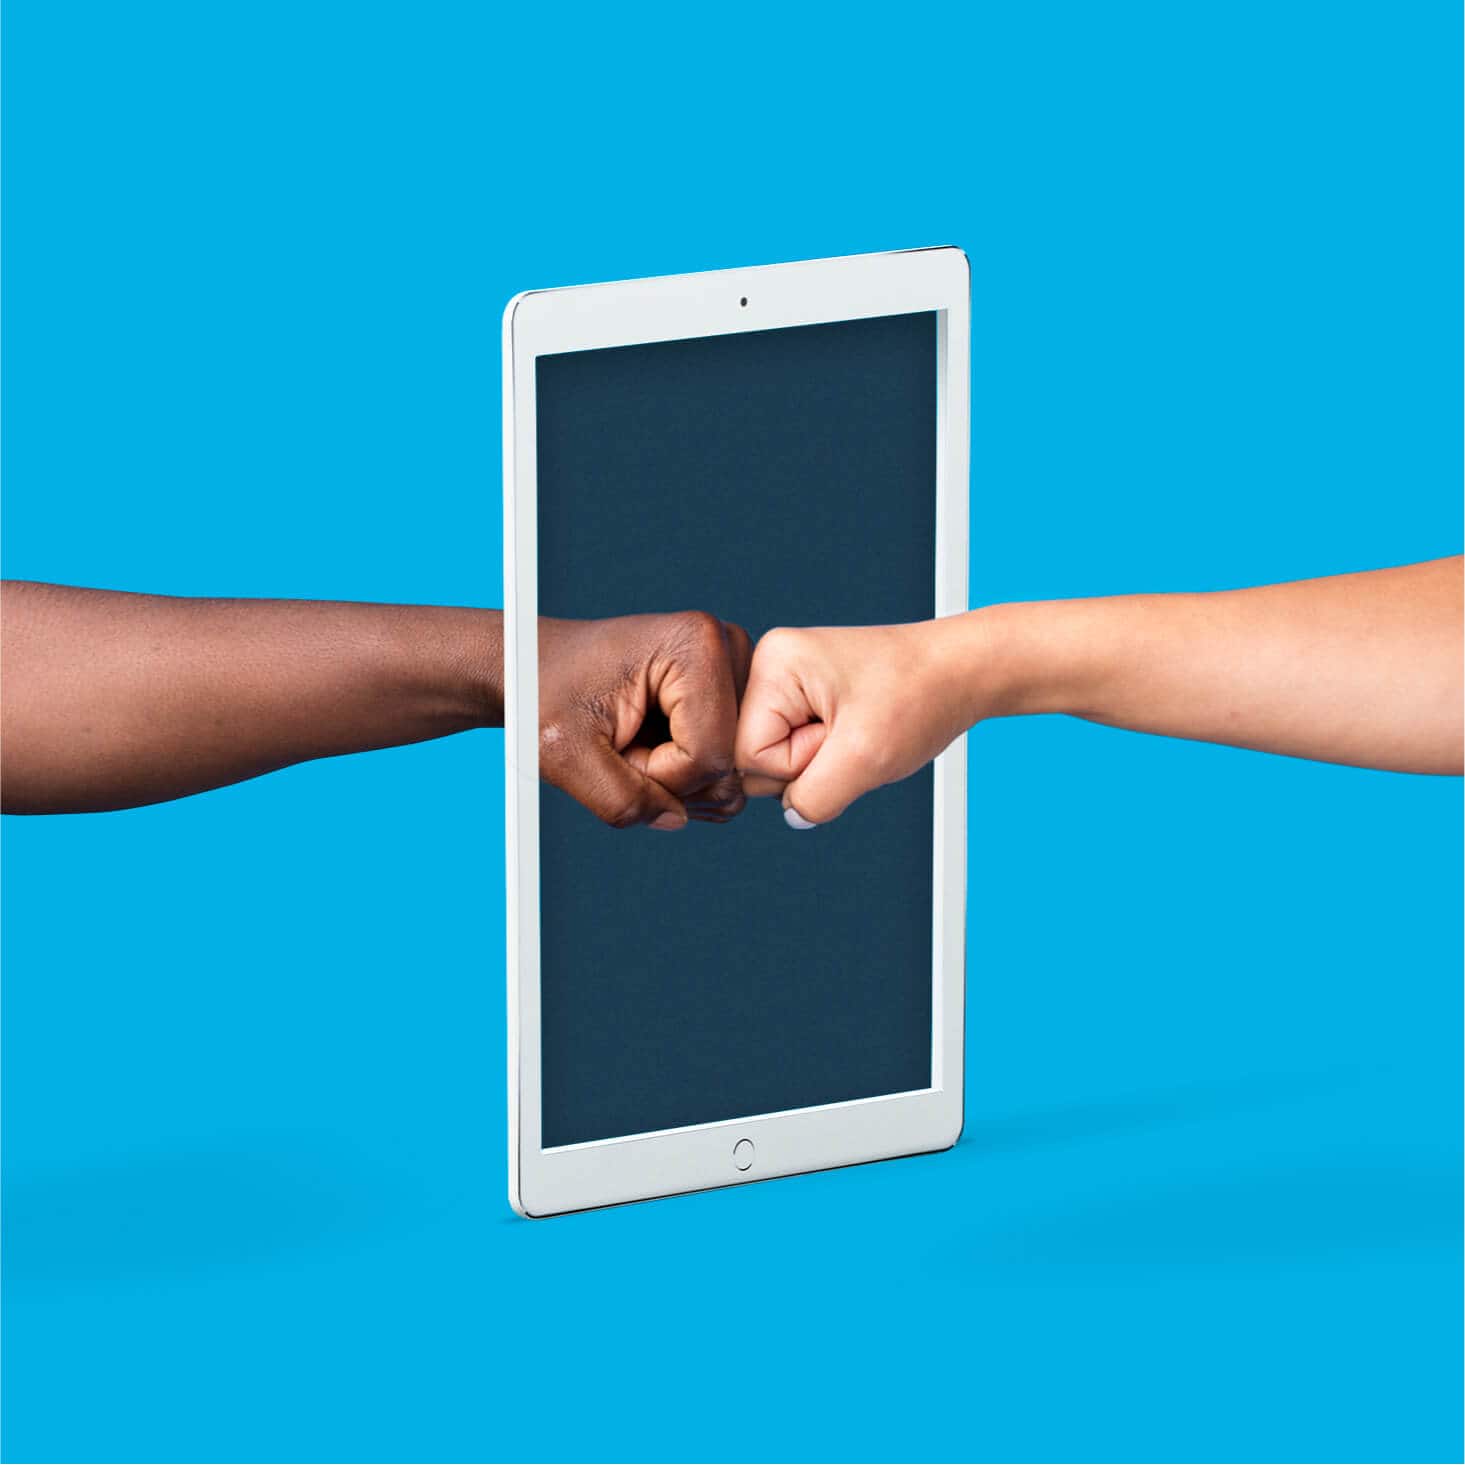 Two hands fist bump through a device to show that e-invoicing is instant, direct and electronic.